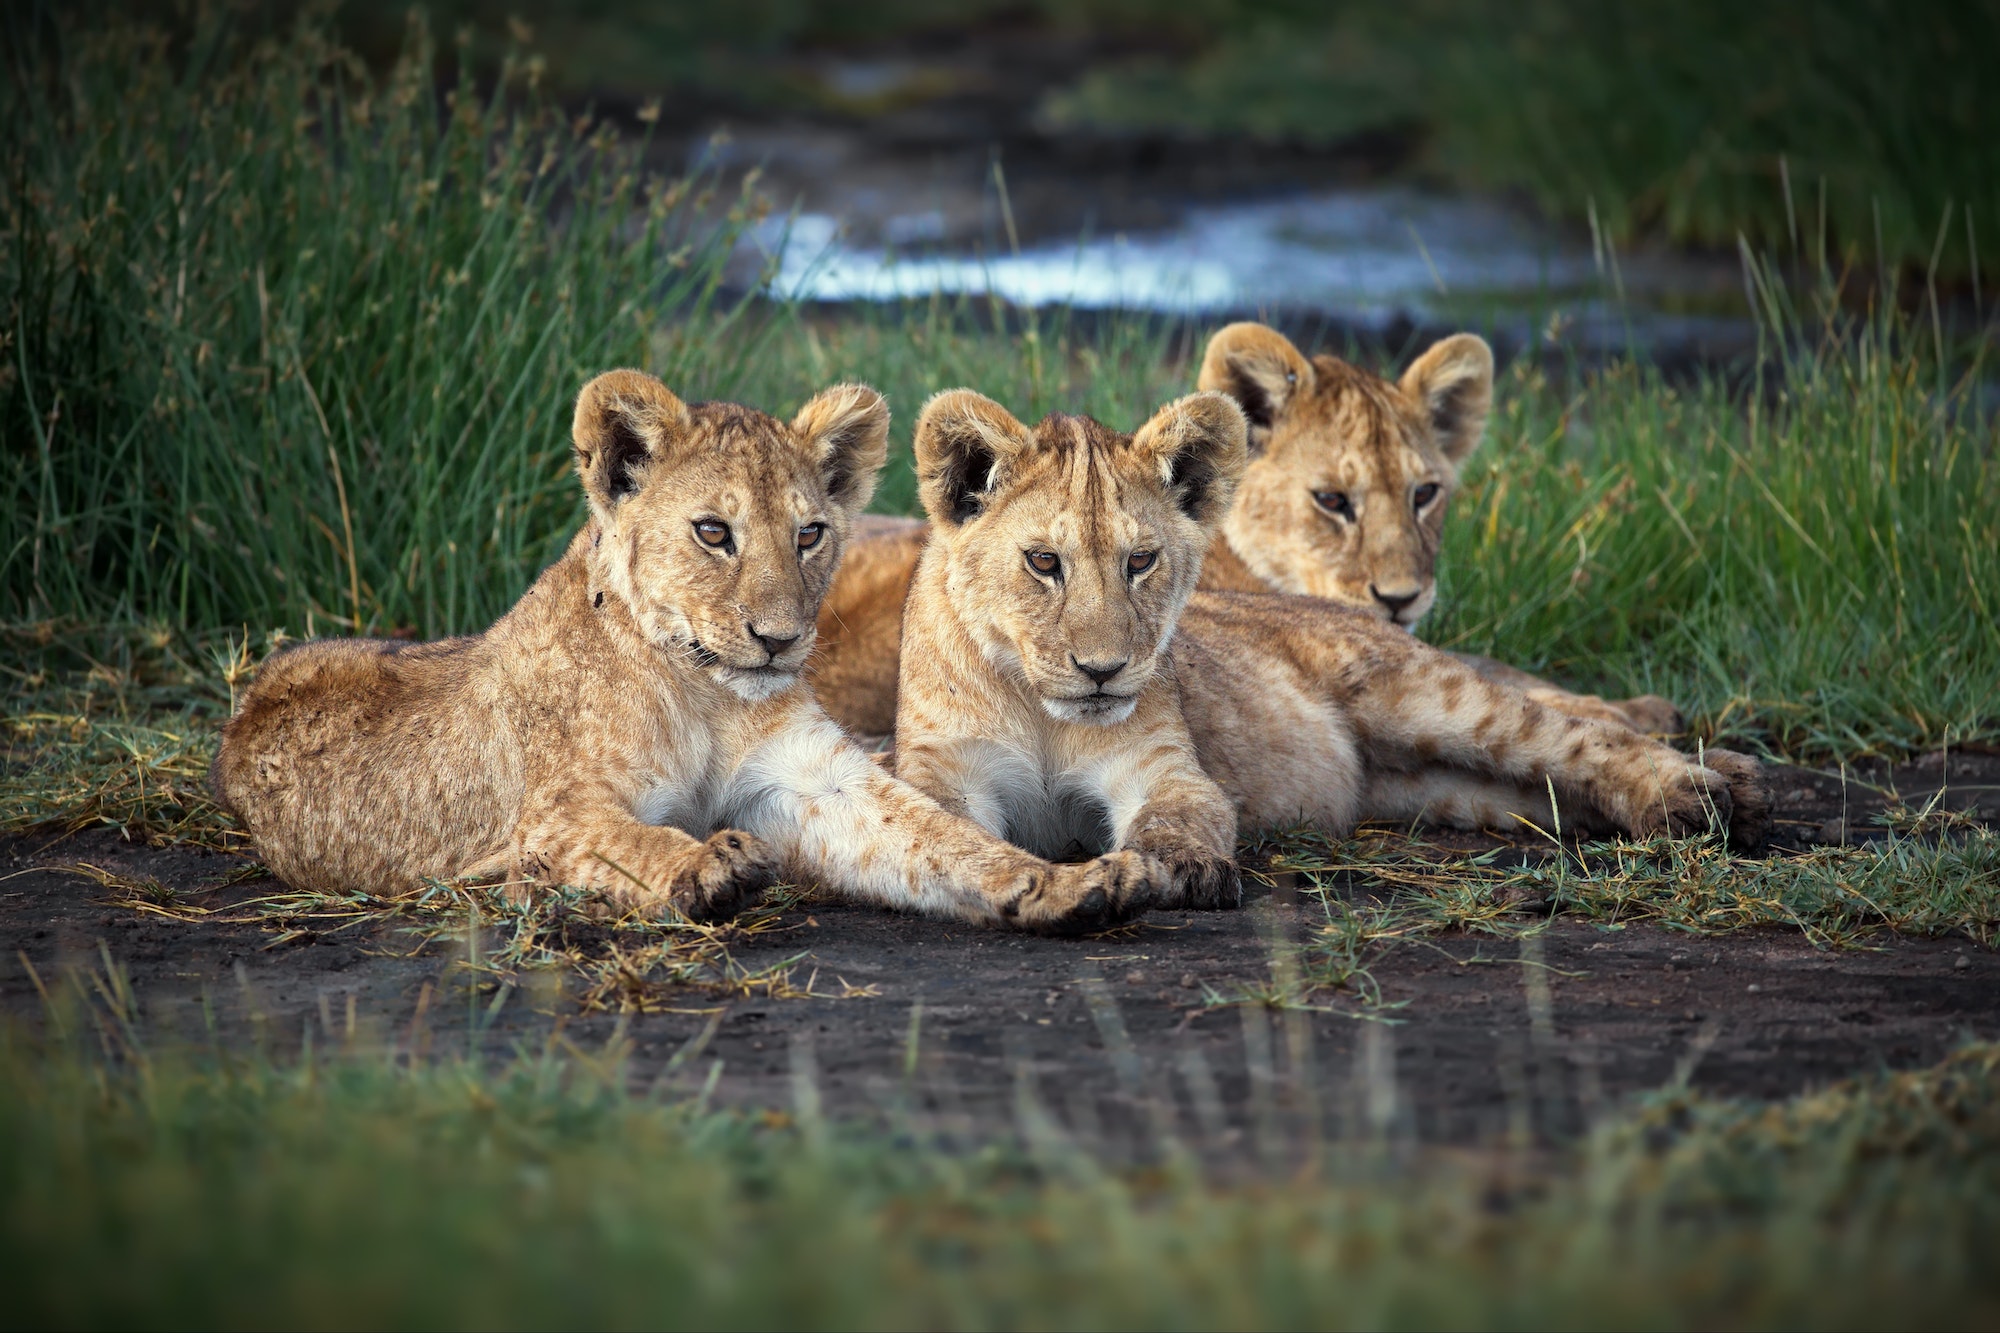 Group of baby lions in Tanzania